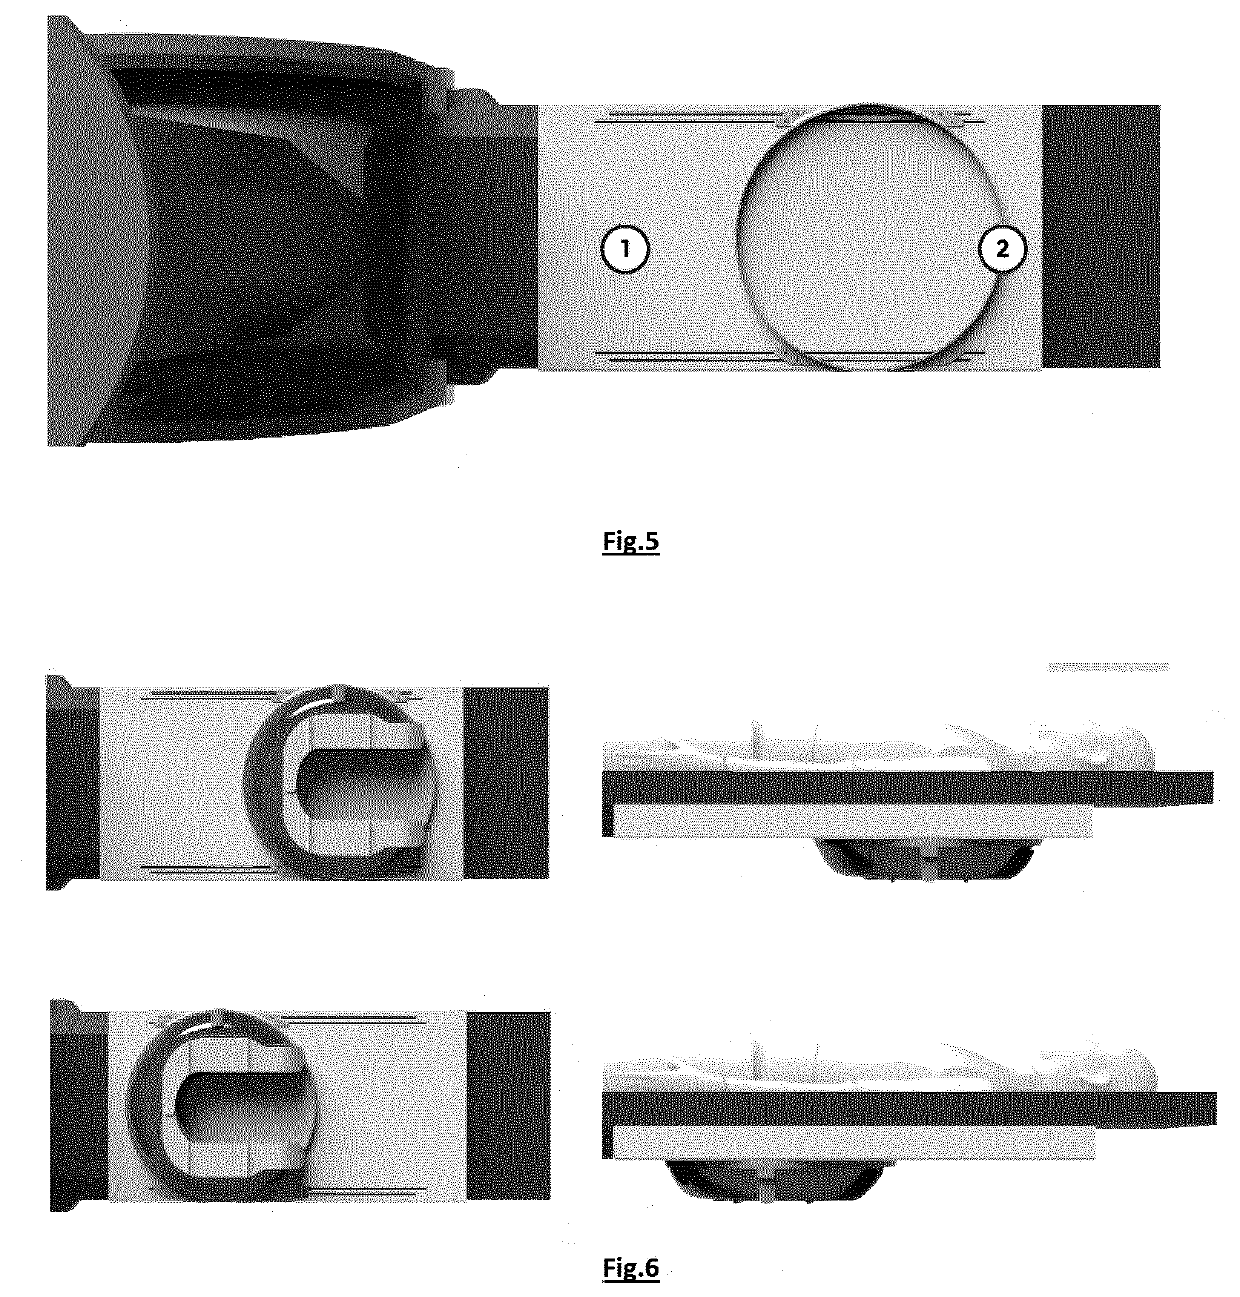 Shielding device for use in medical imaging